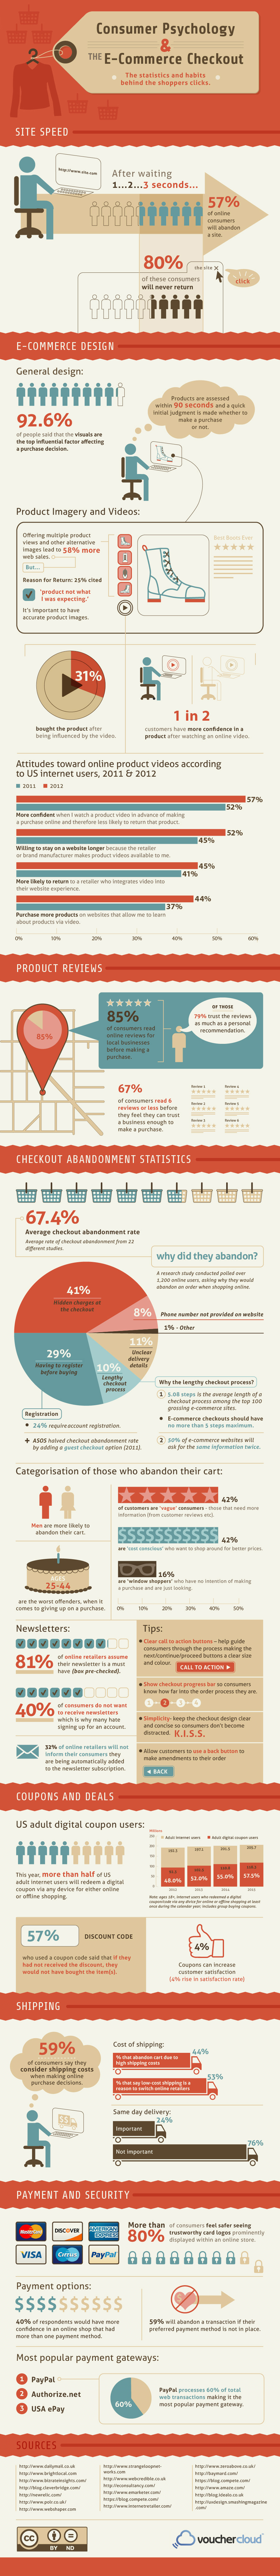 Consumer-Psychology-and-ECommerce-Checkouts-Infographic-SML